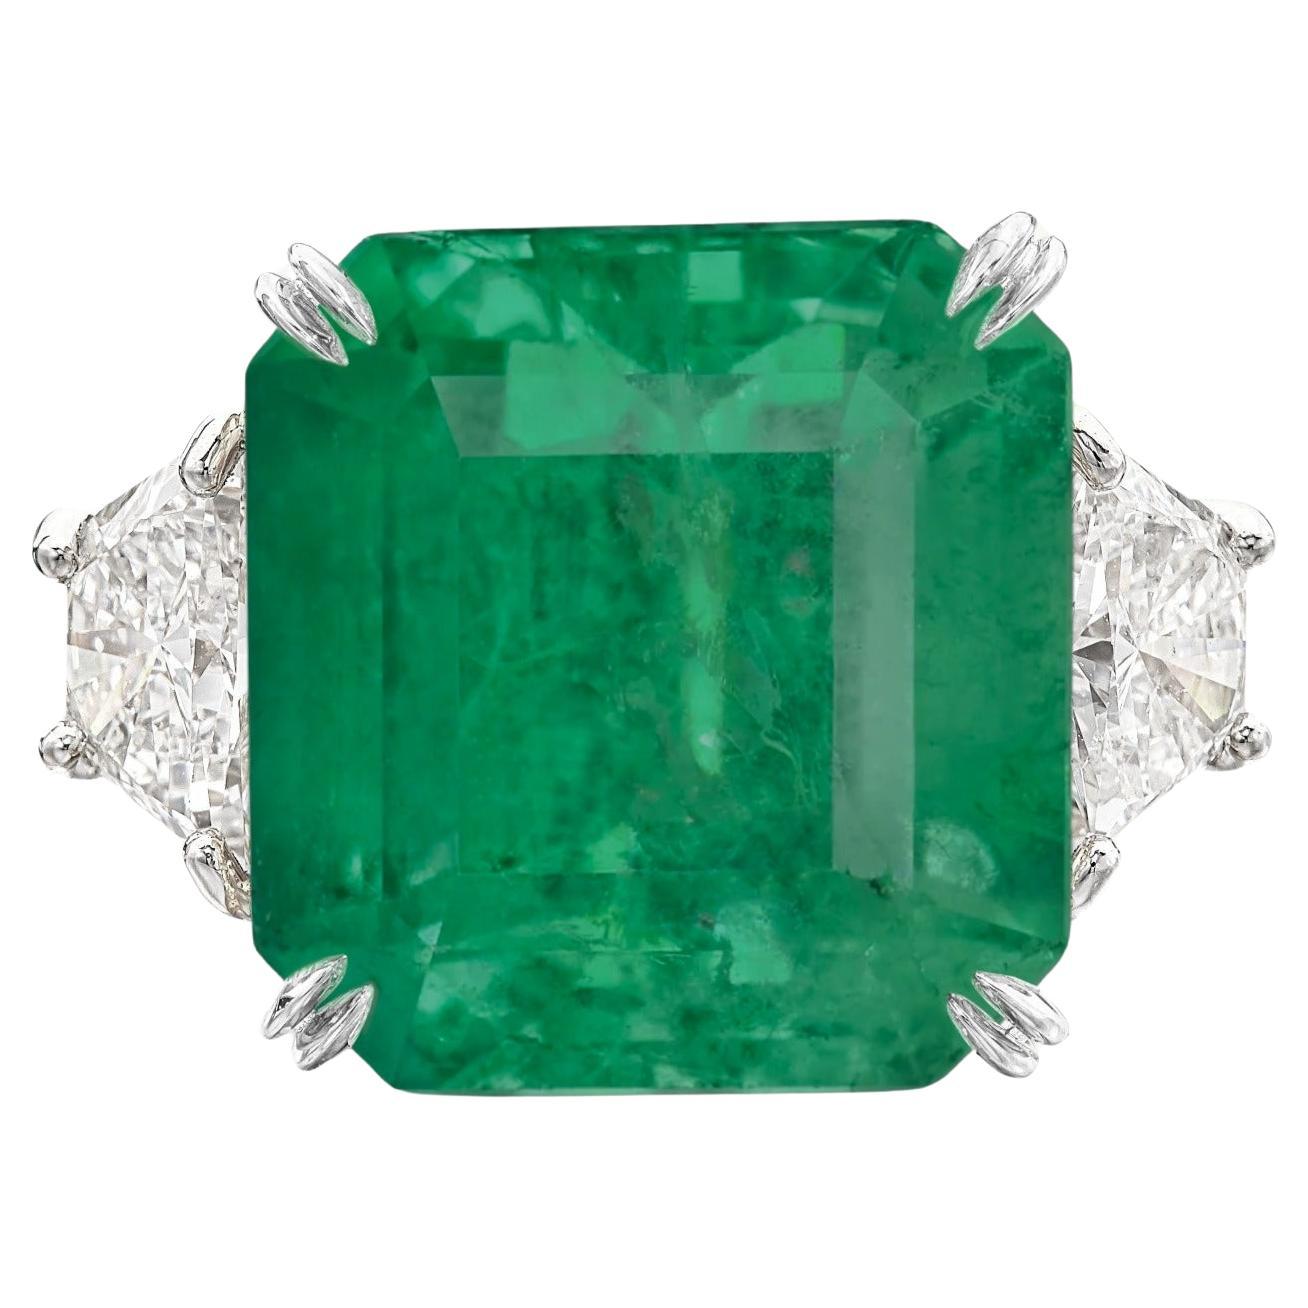 EXCEPTIONAL VIVID GREEN 10 Carat Emerald Diamond Ring For Sale